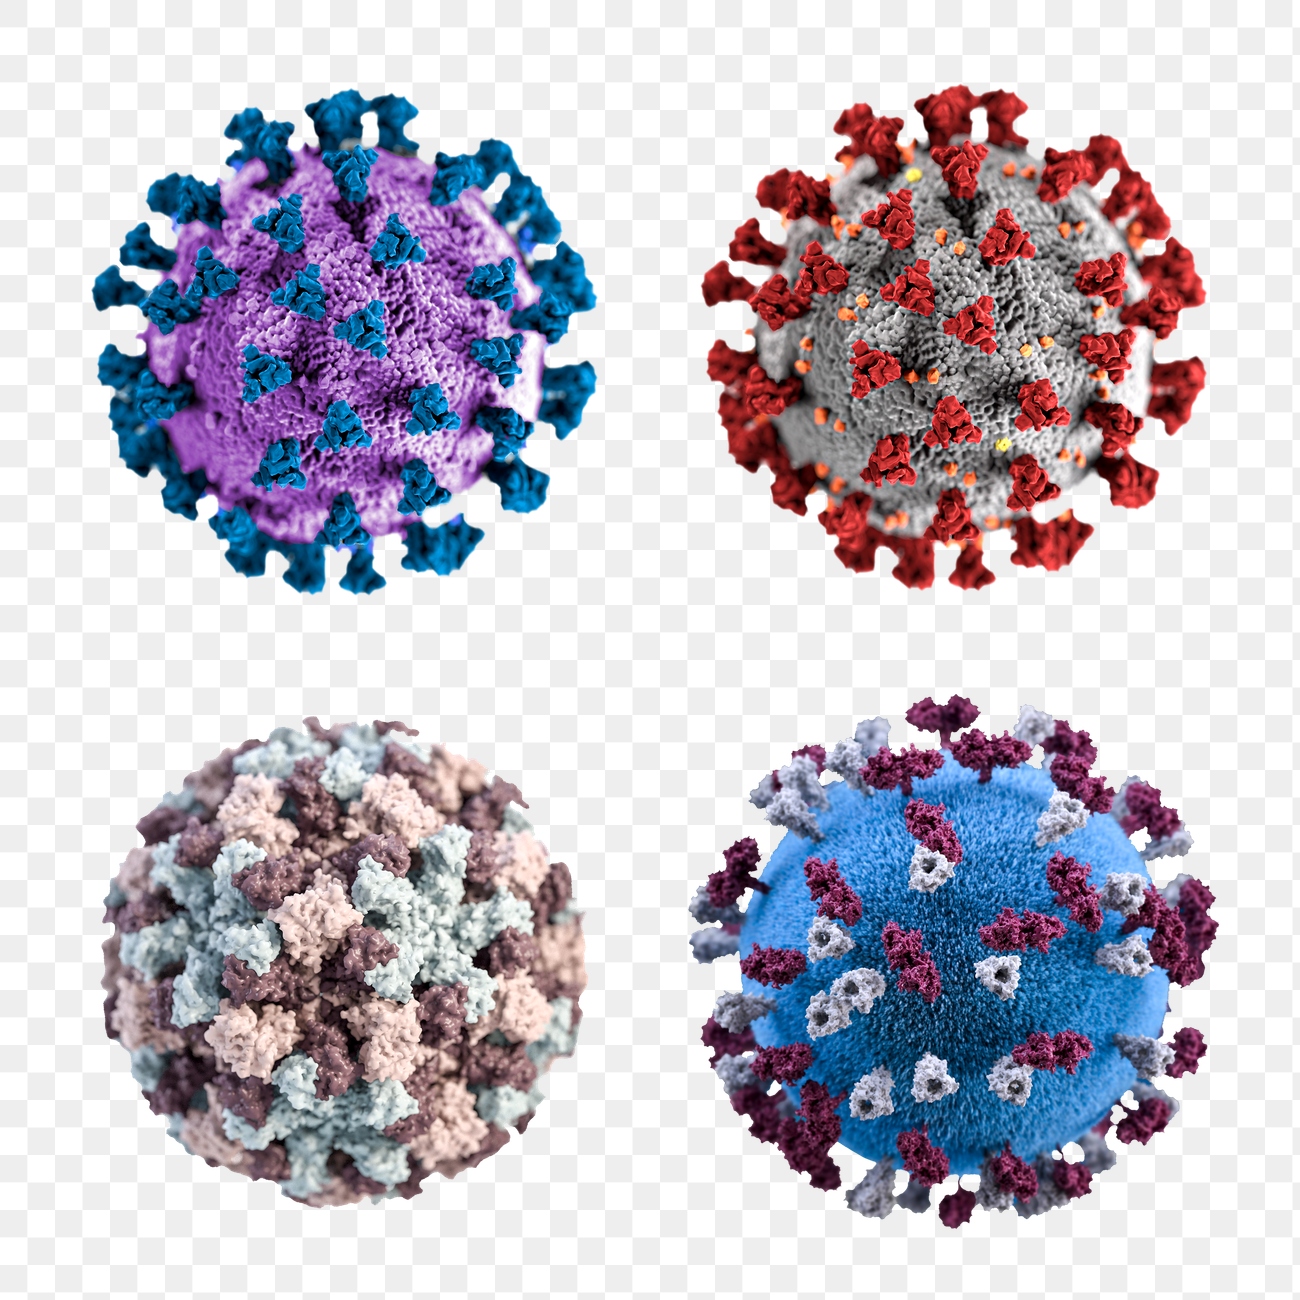 Ultrastructural Illustration Of Coronavirus And Other Infectious Virus Free Transparent Png 2296936